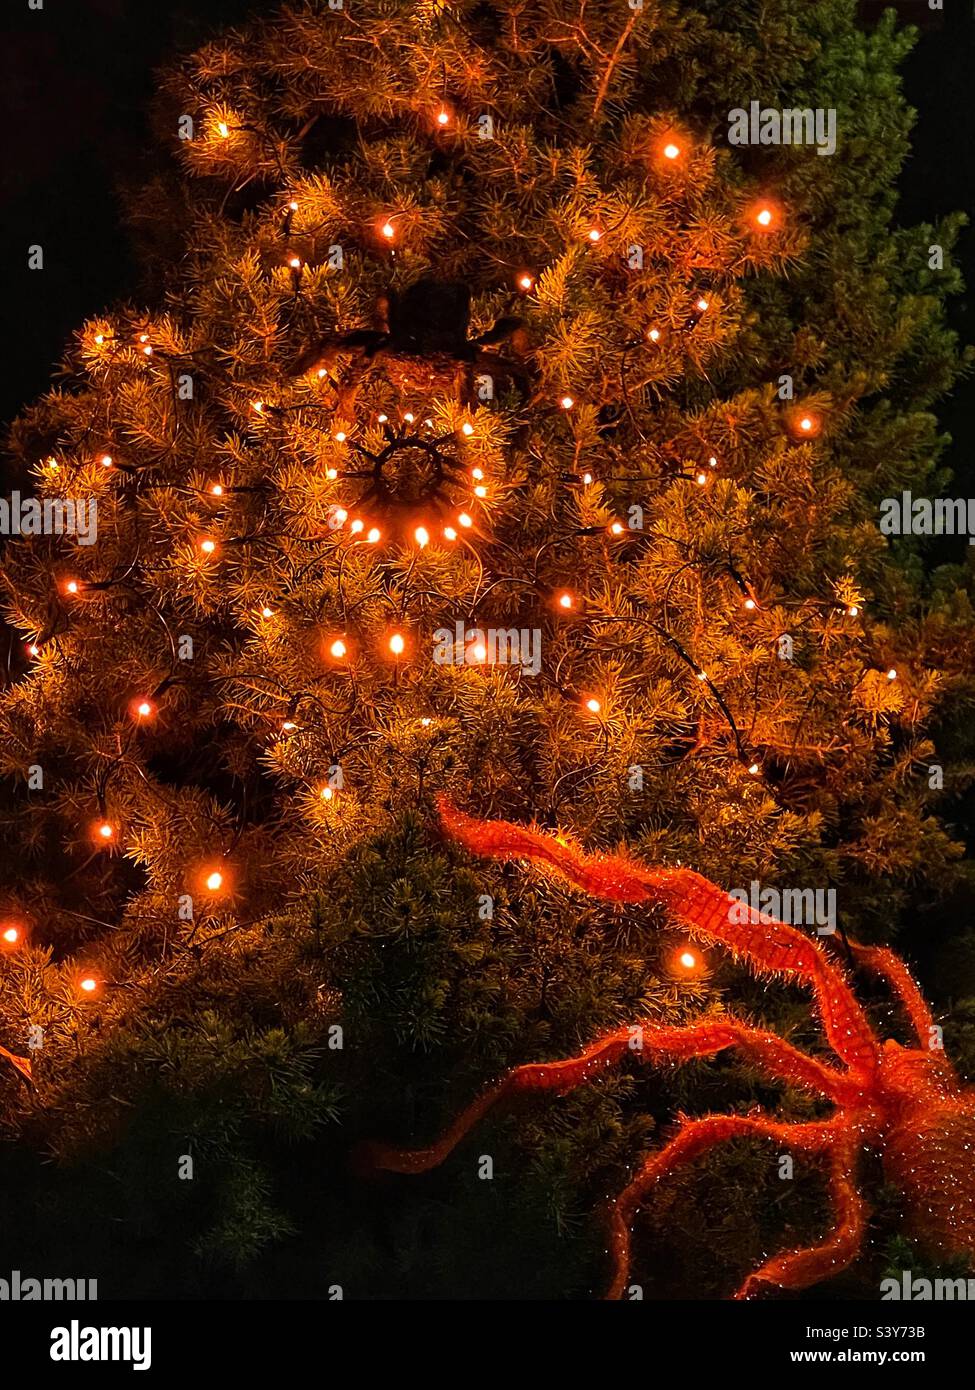 A creepy lighted Halloween decoration at a home in Utah, USA. A large orange spider crawls upward on a pine tree towards a lighted glowing cobweb “spun” by a smaller black spider. Stock Photo